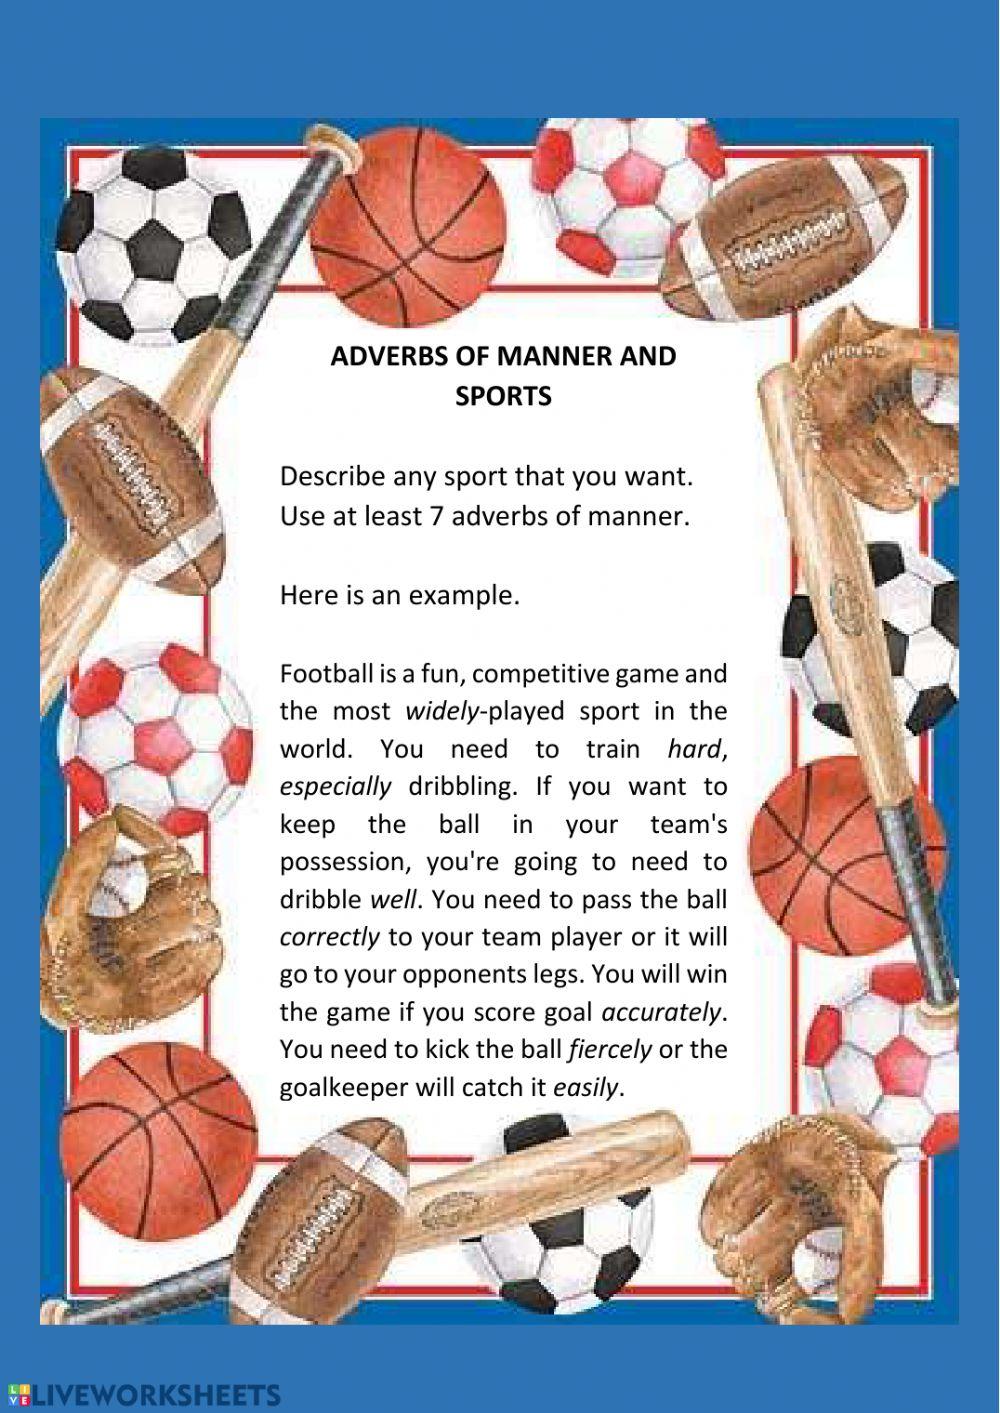 Adverbs of manner and sports